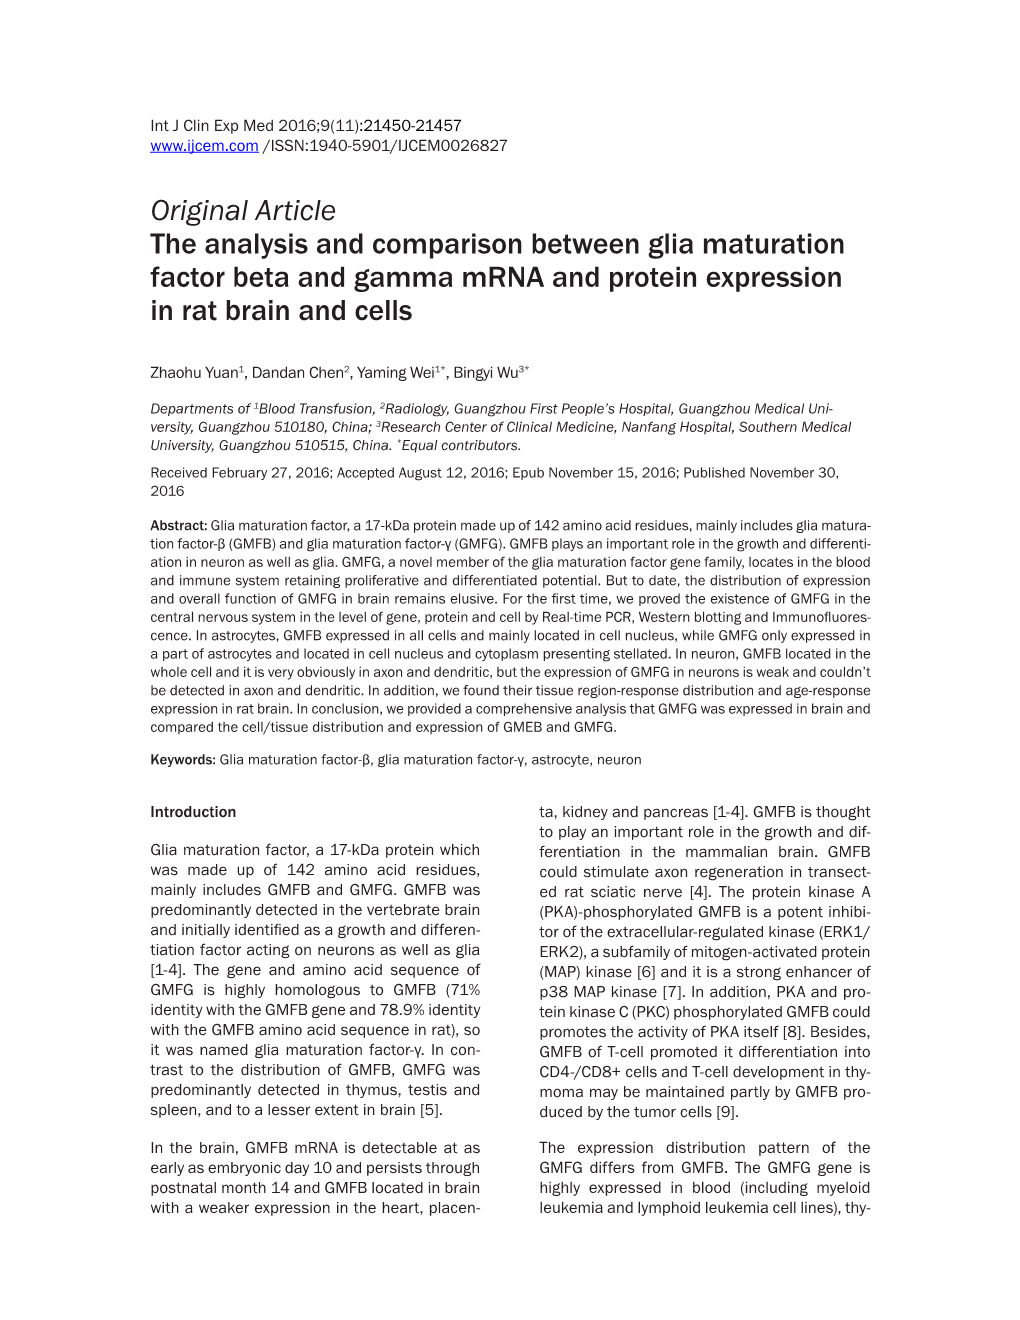 Original Article the Analysis and Comparison Between Glia Maturation Factor Beta and Gamma Mrna and Protein Expression in Rat Brain and Cells